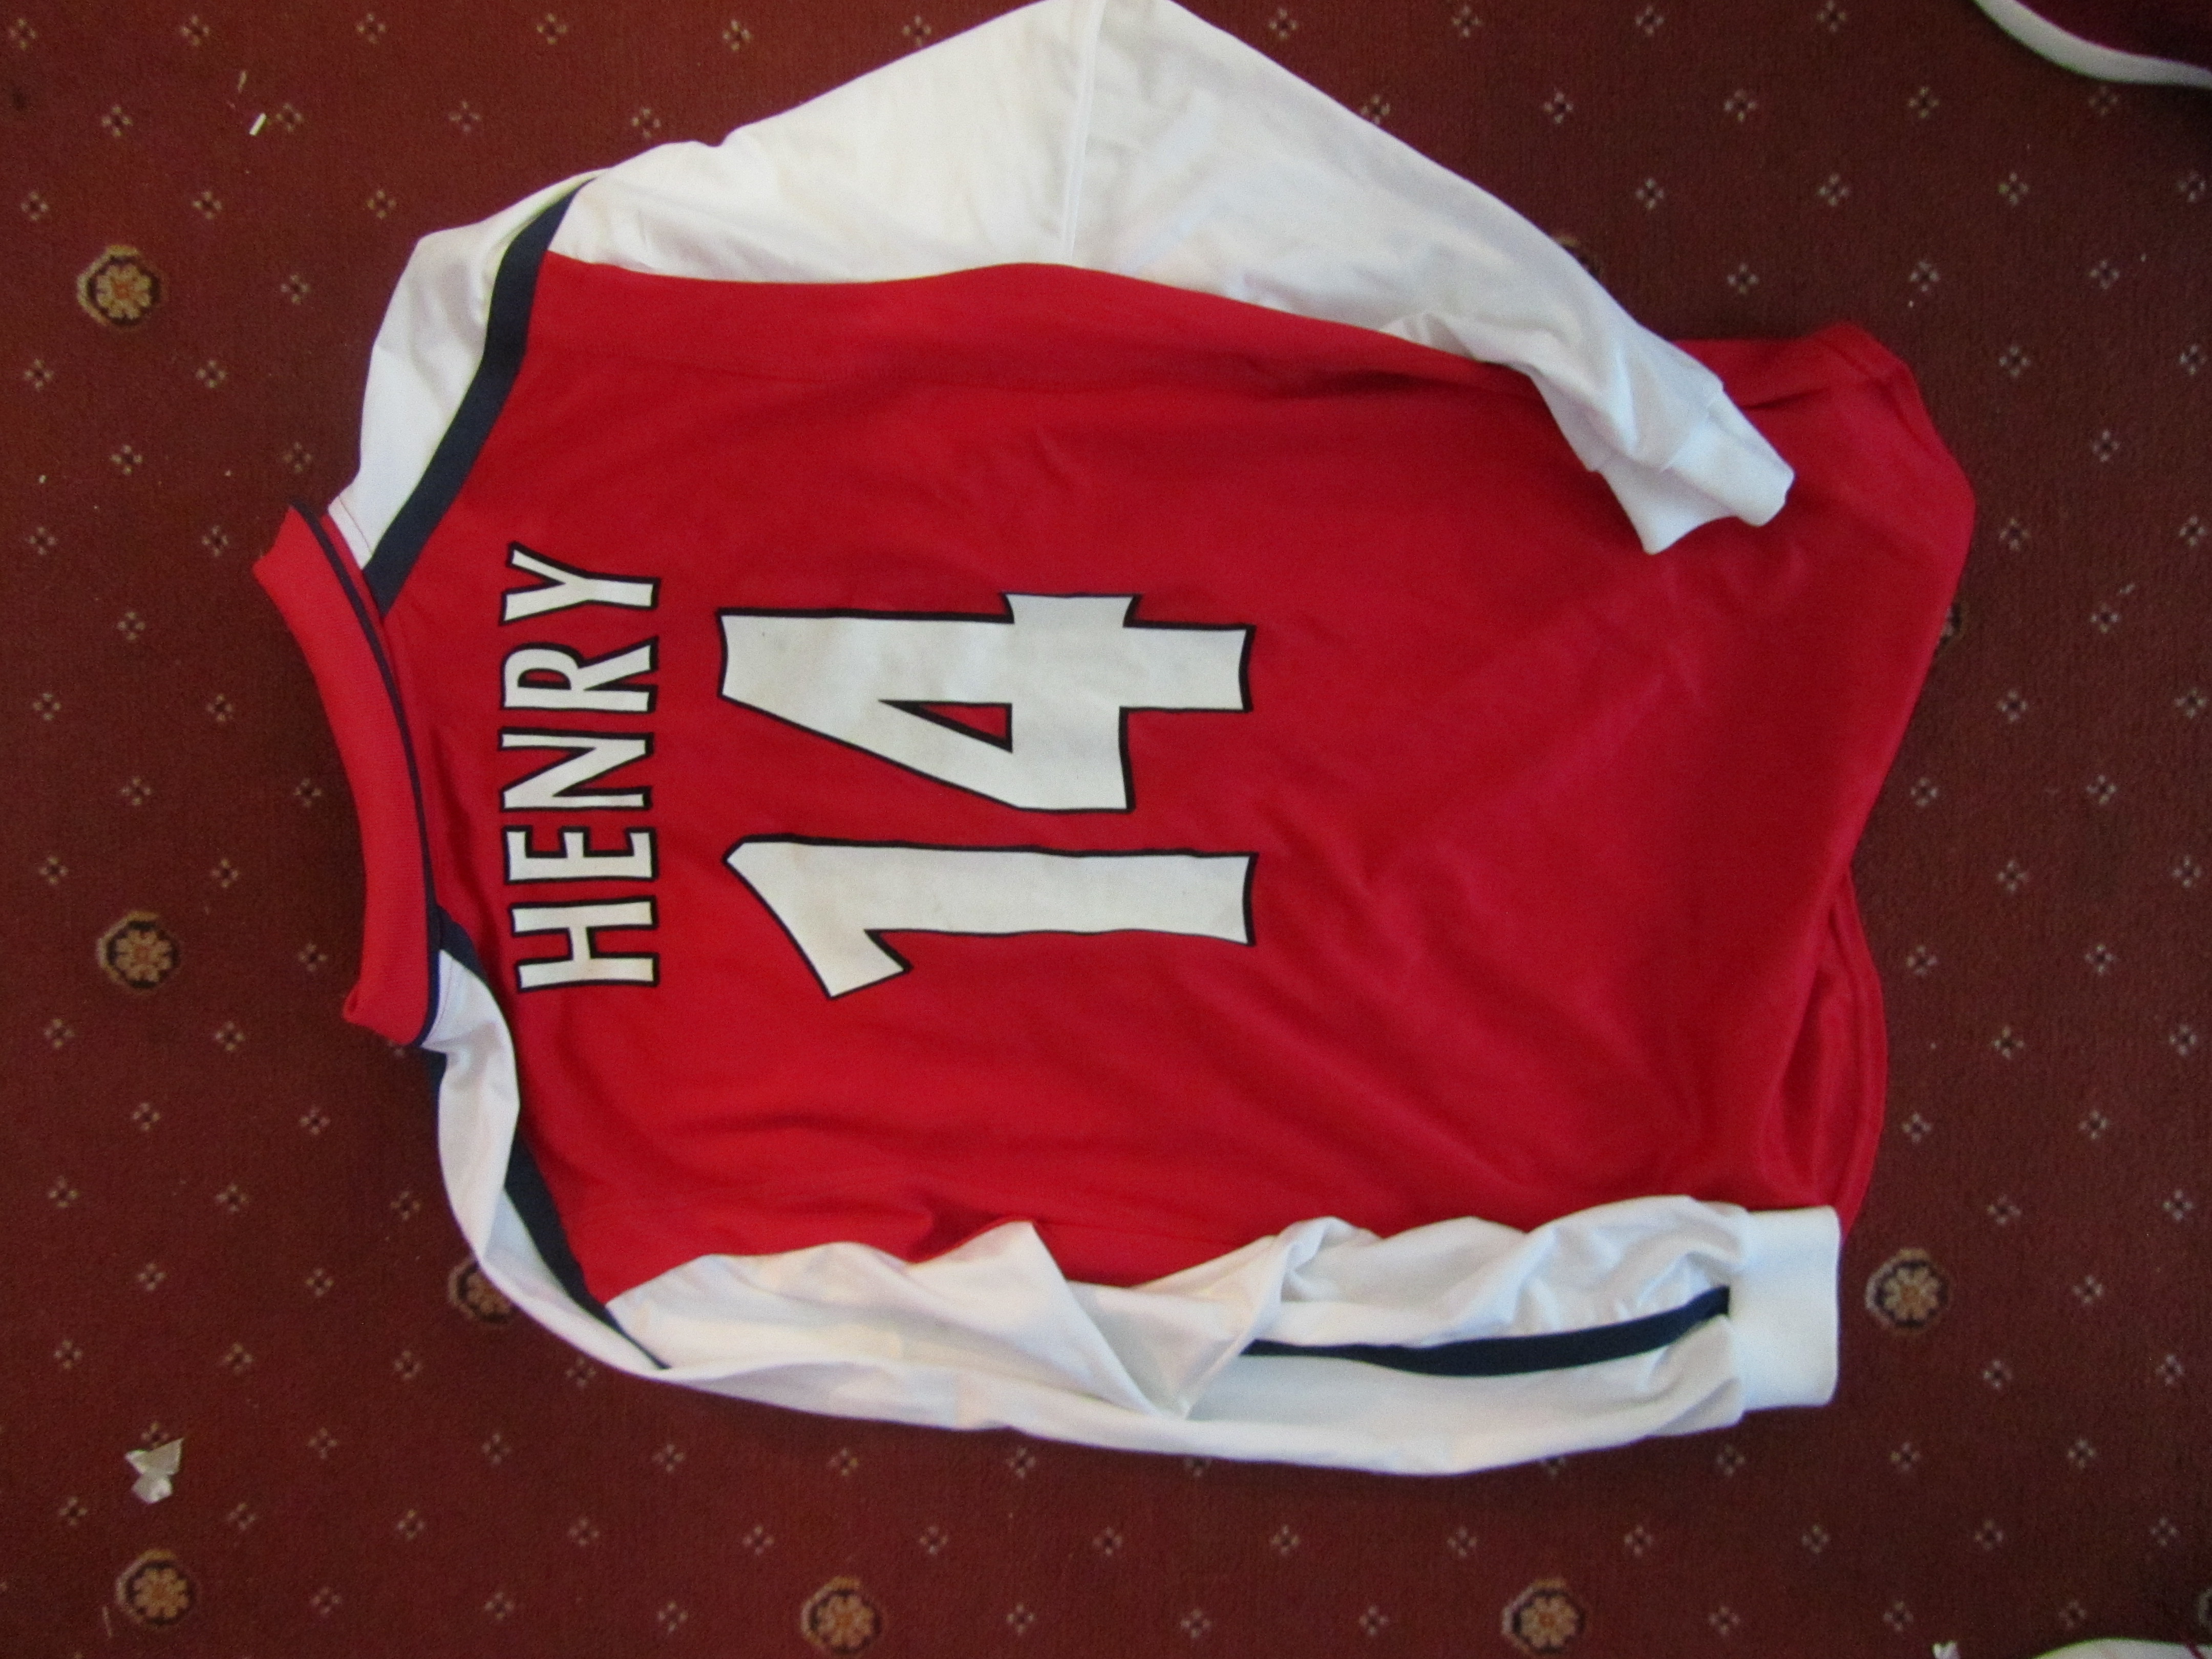 Thierry Henry red & white Arsenal No. - Image 4 of 4